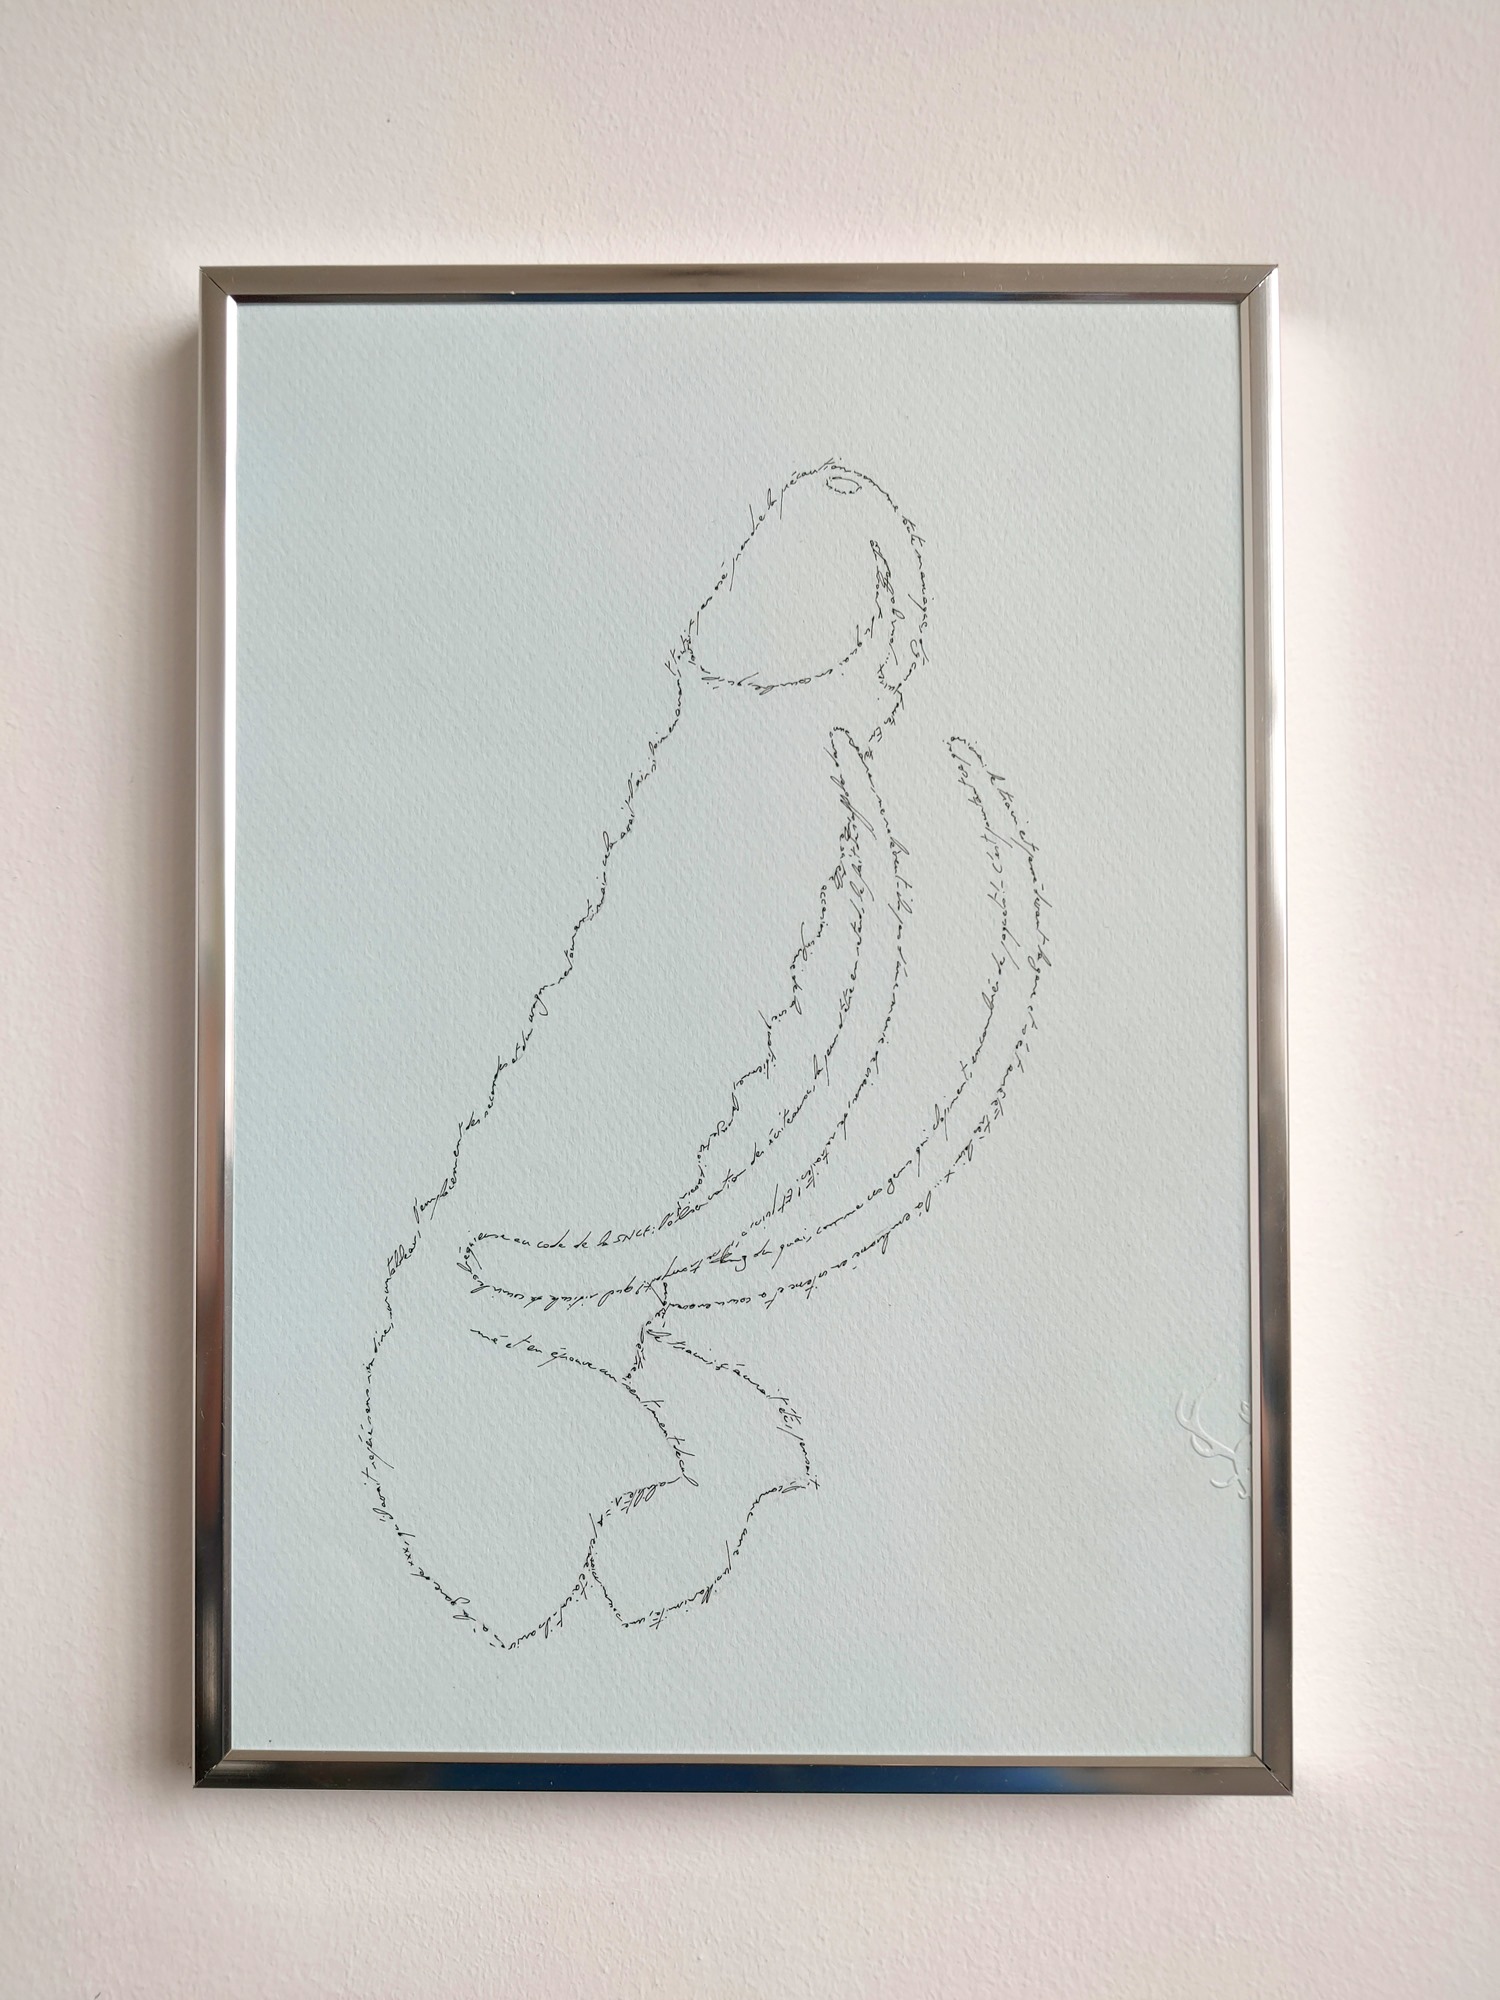 Mister Elephant, Marc Molk, 2020, Calligram, Indian ink on textured paper, 11,7 x 8,27 in